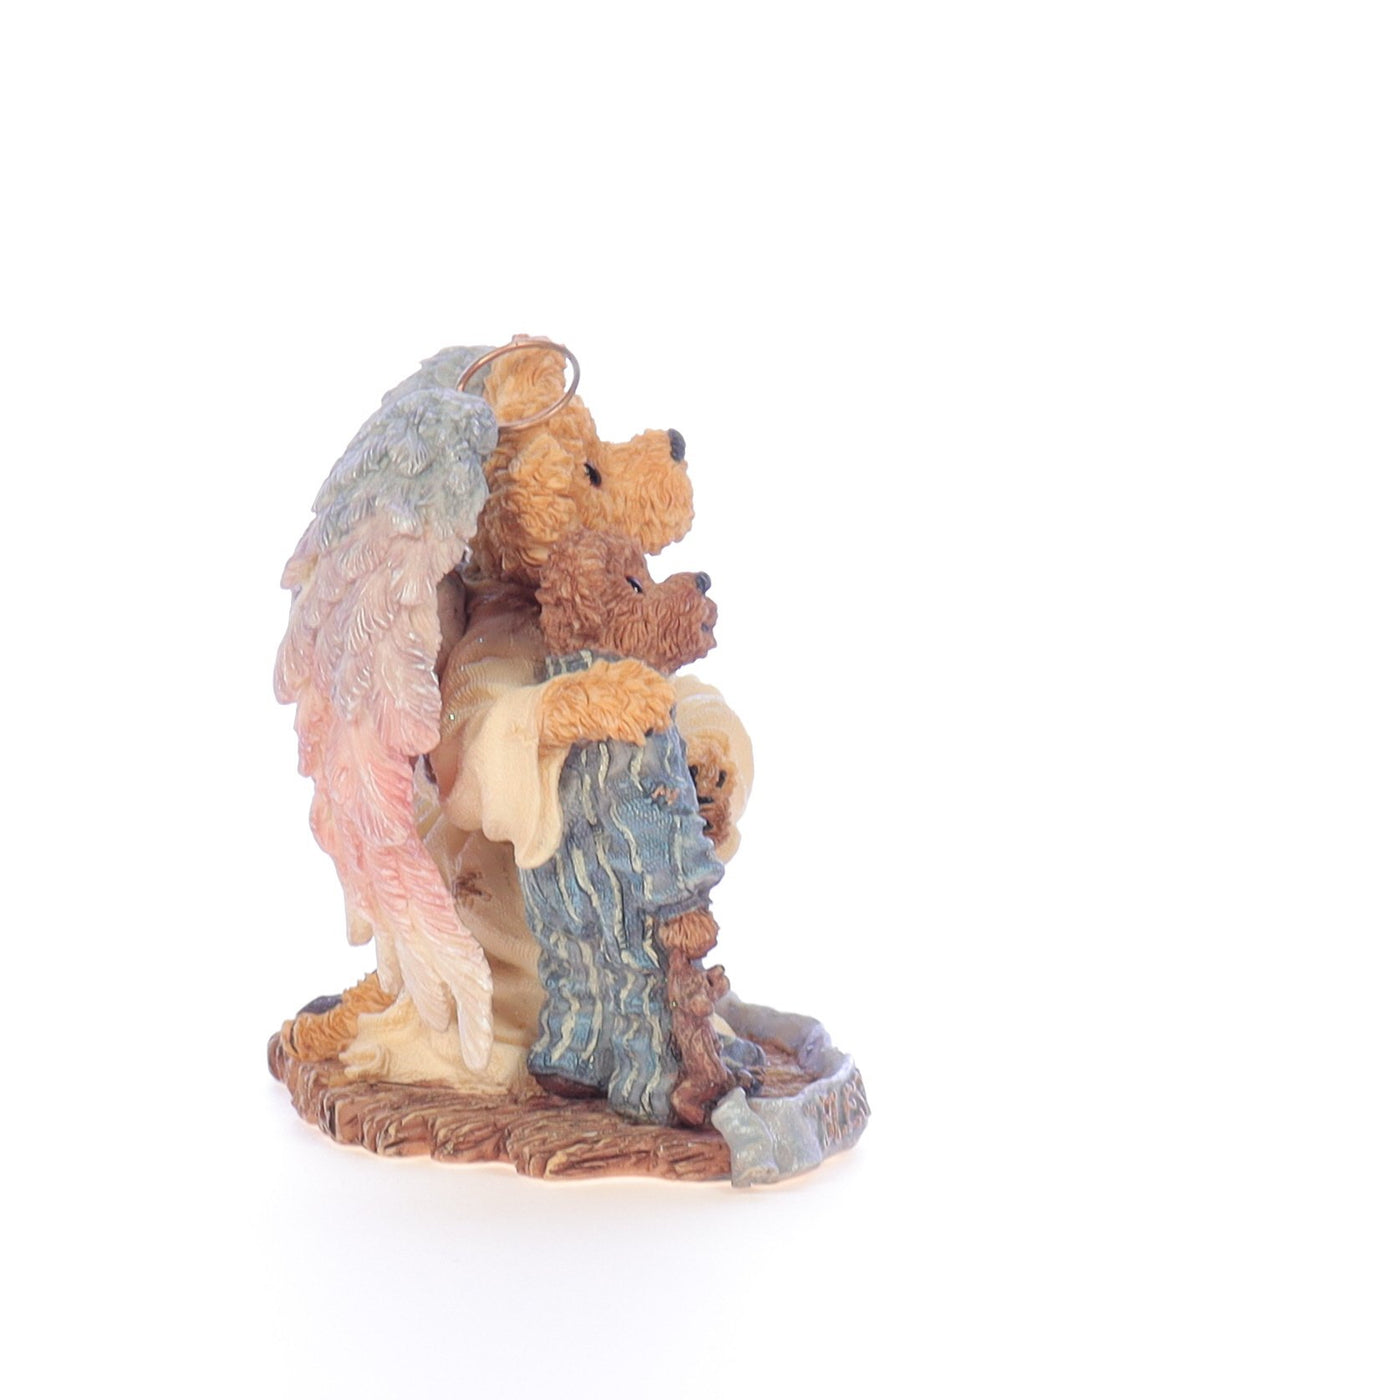 Boyds_Bears_Bearstone_Resin_Figurine_Hope_Angelwish_Everychild_Bless_Our_Children_228361_07